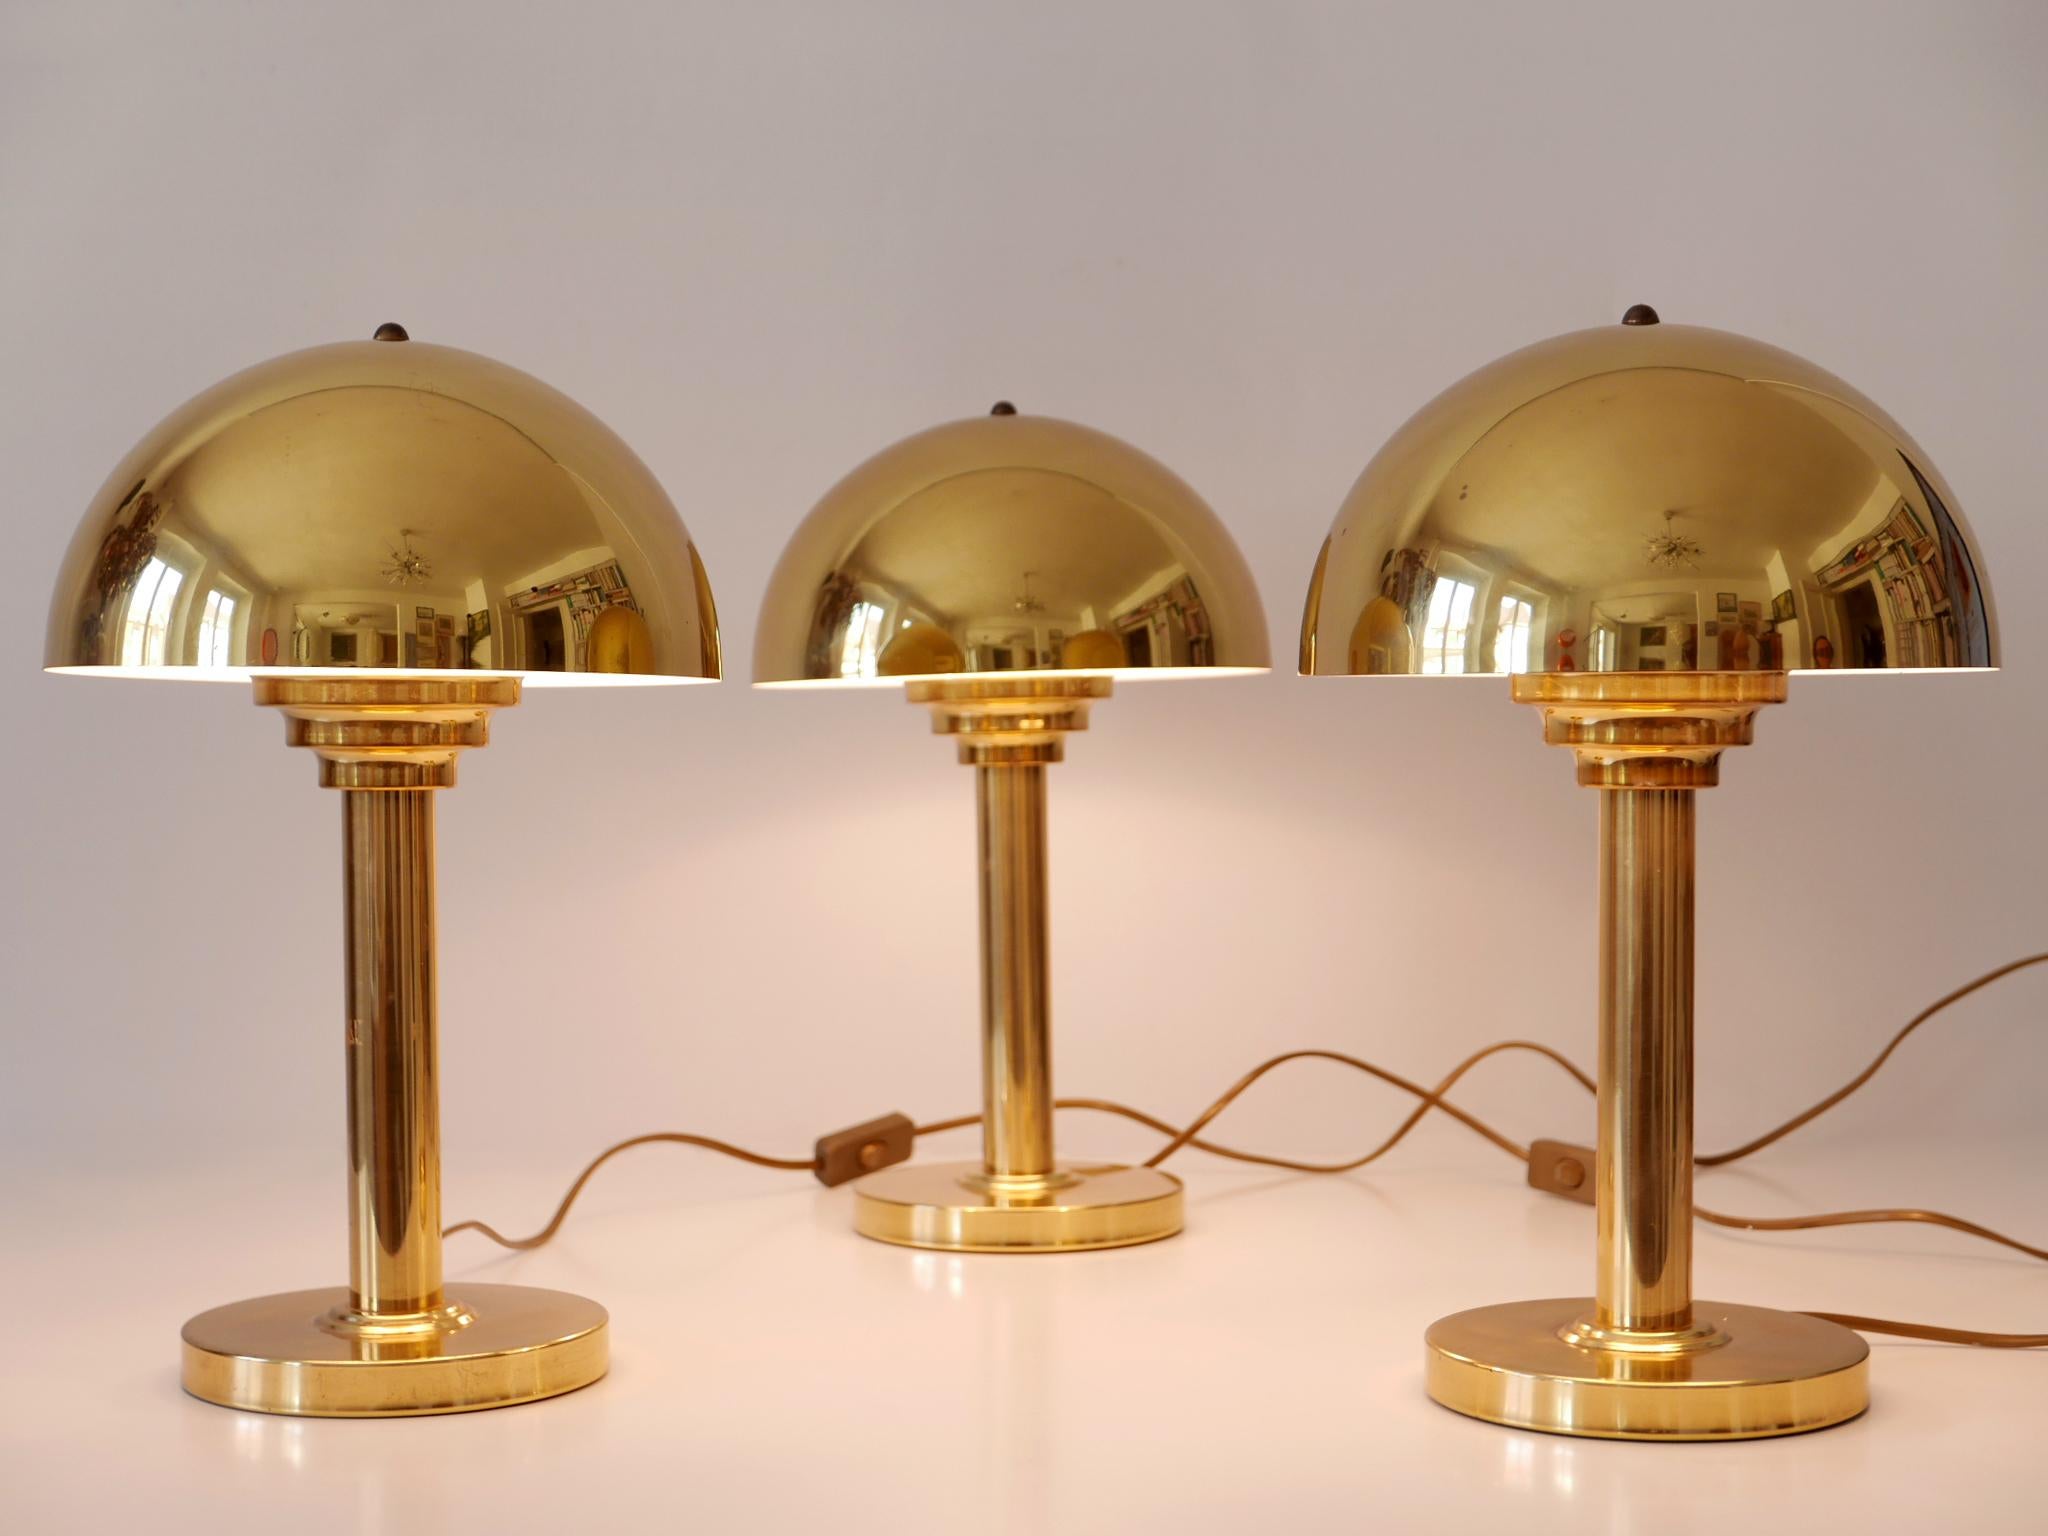 Elegant Mid-Century Modern Brass Table Lamps by WSB, Germany, 1960s For Sale 9